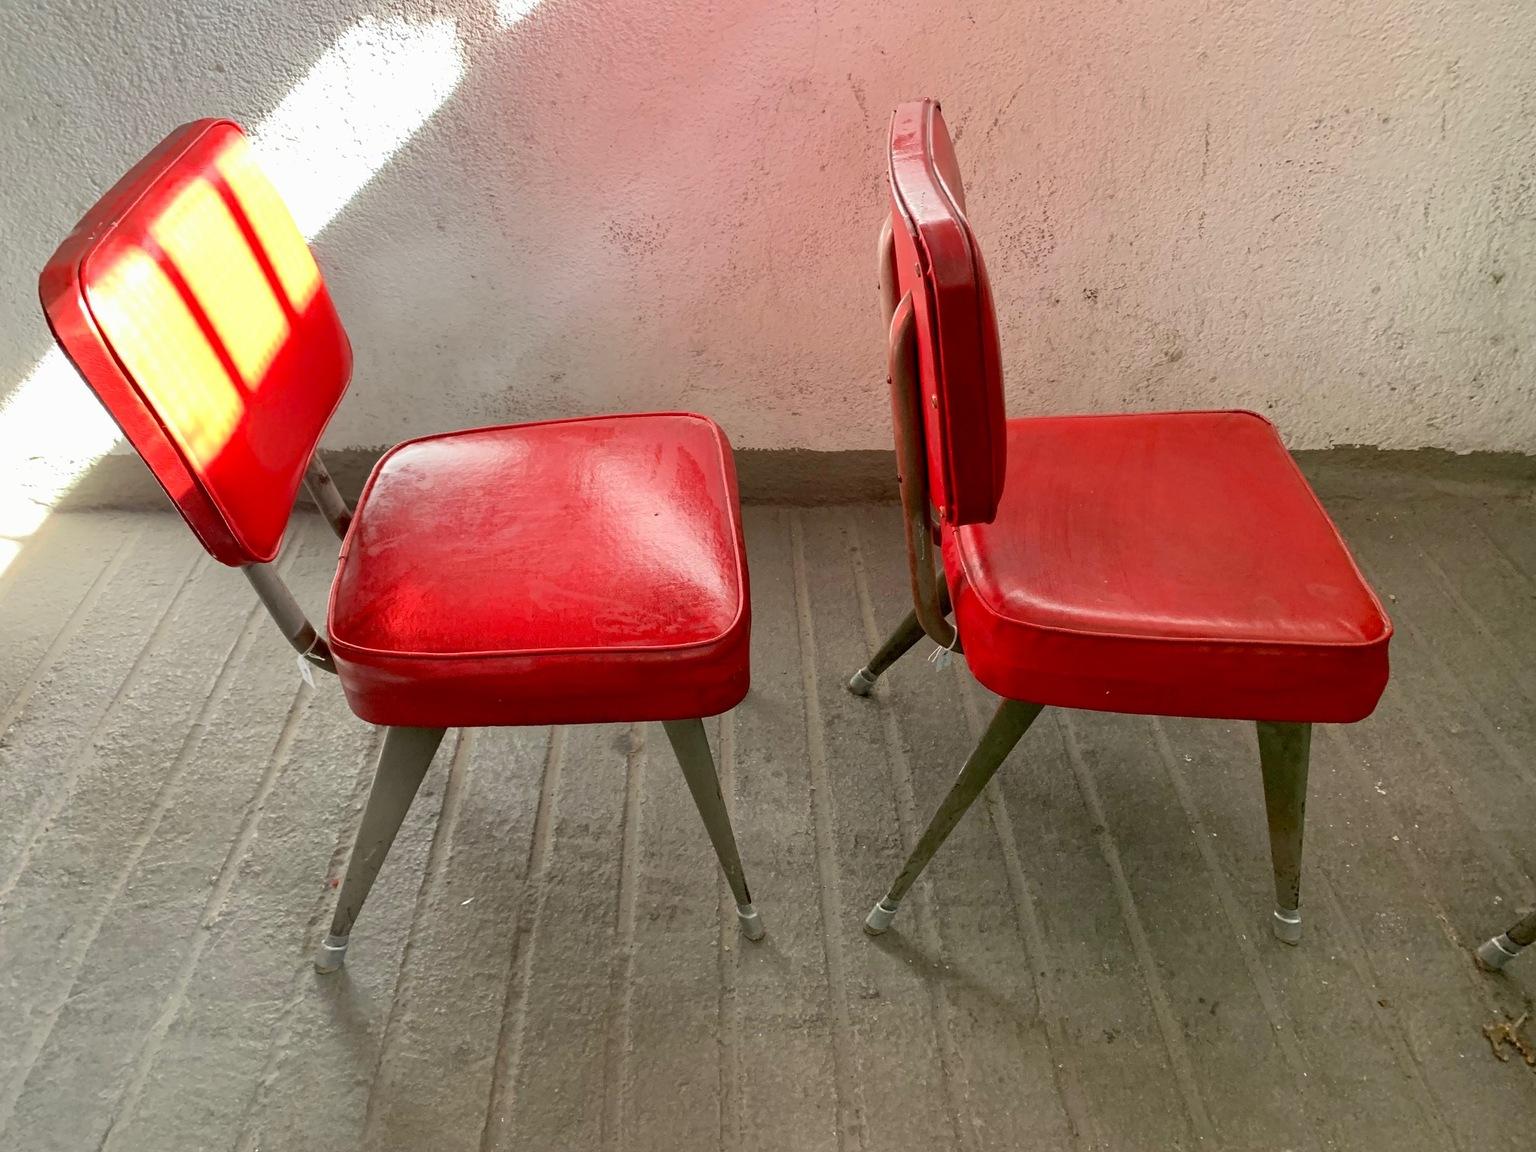 i have some red chairs in italian